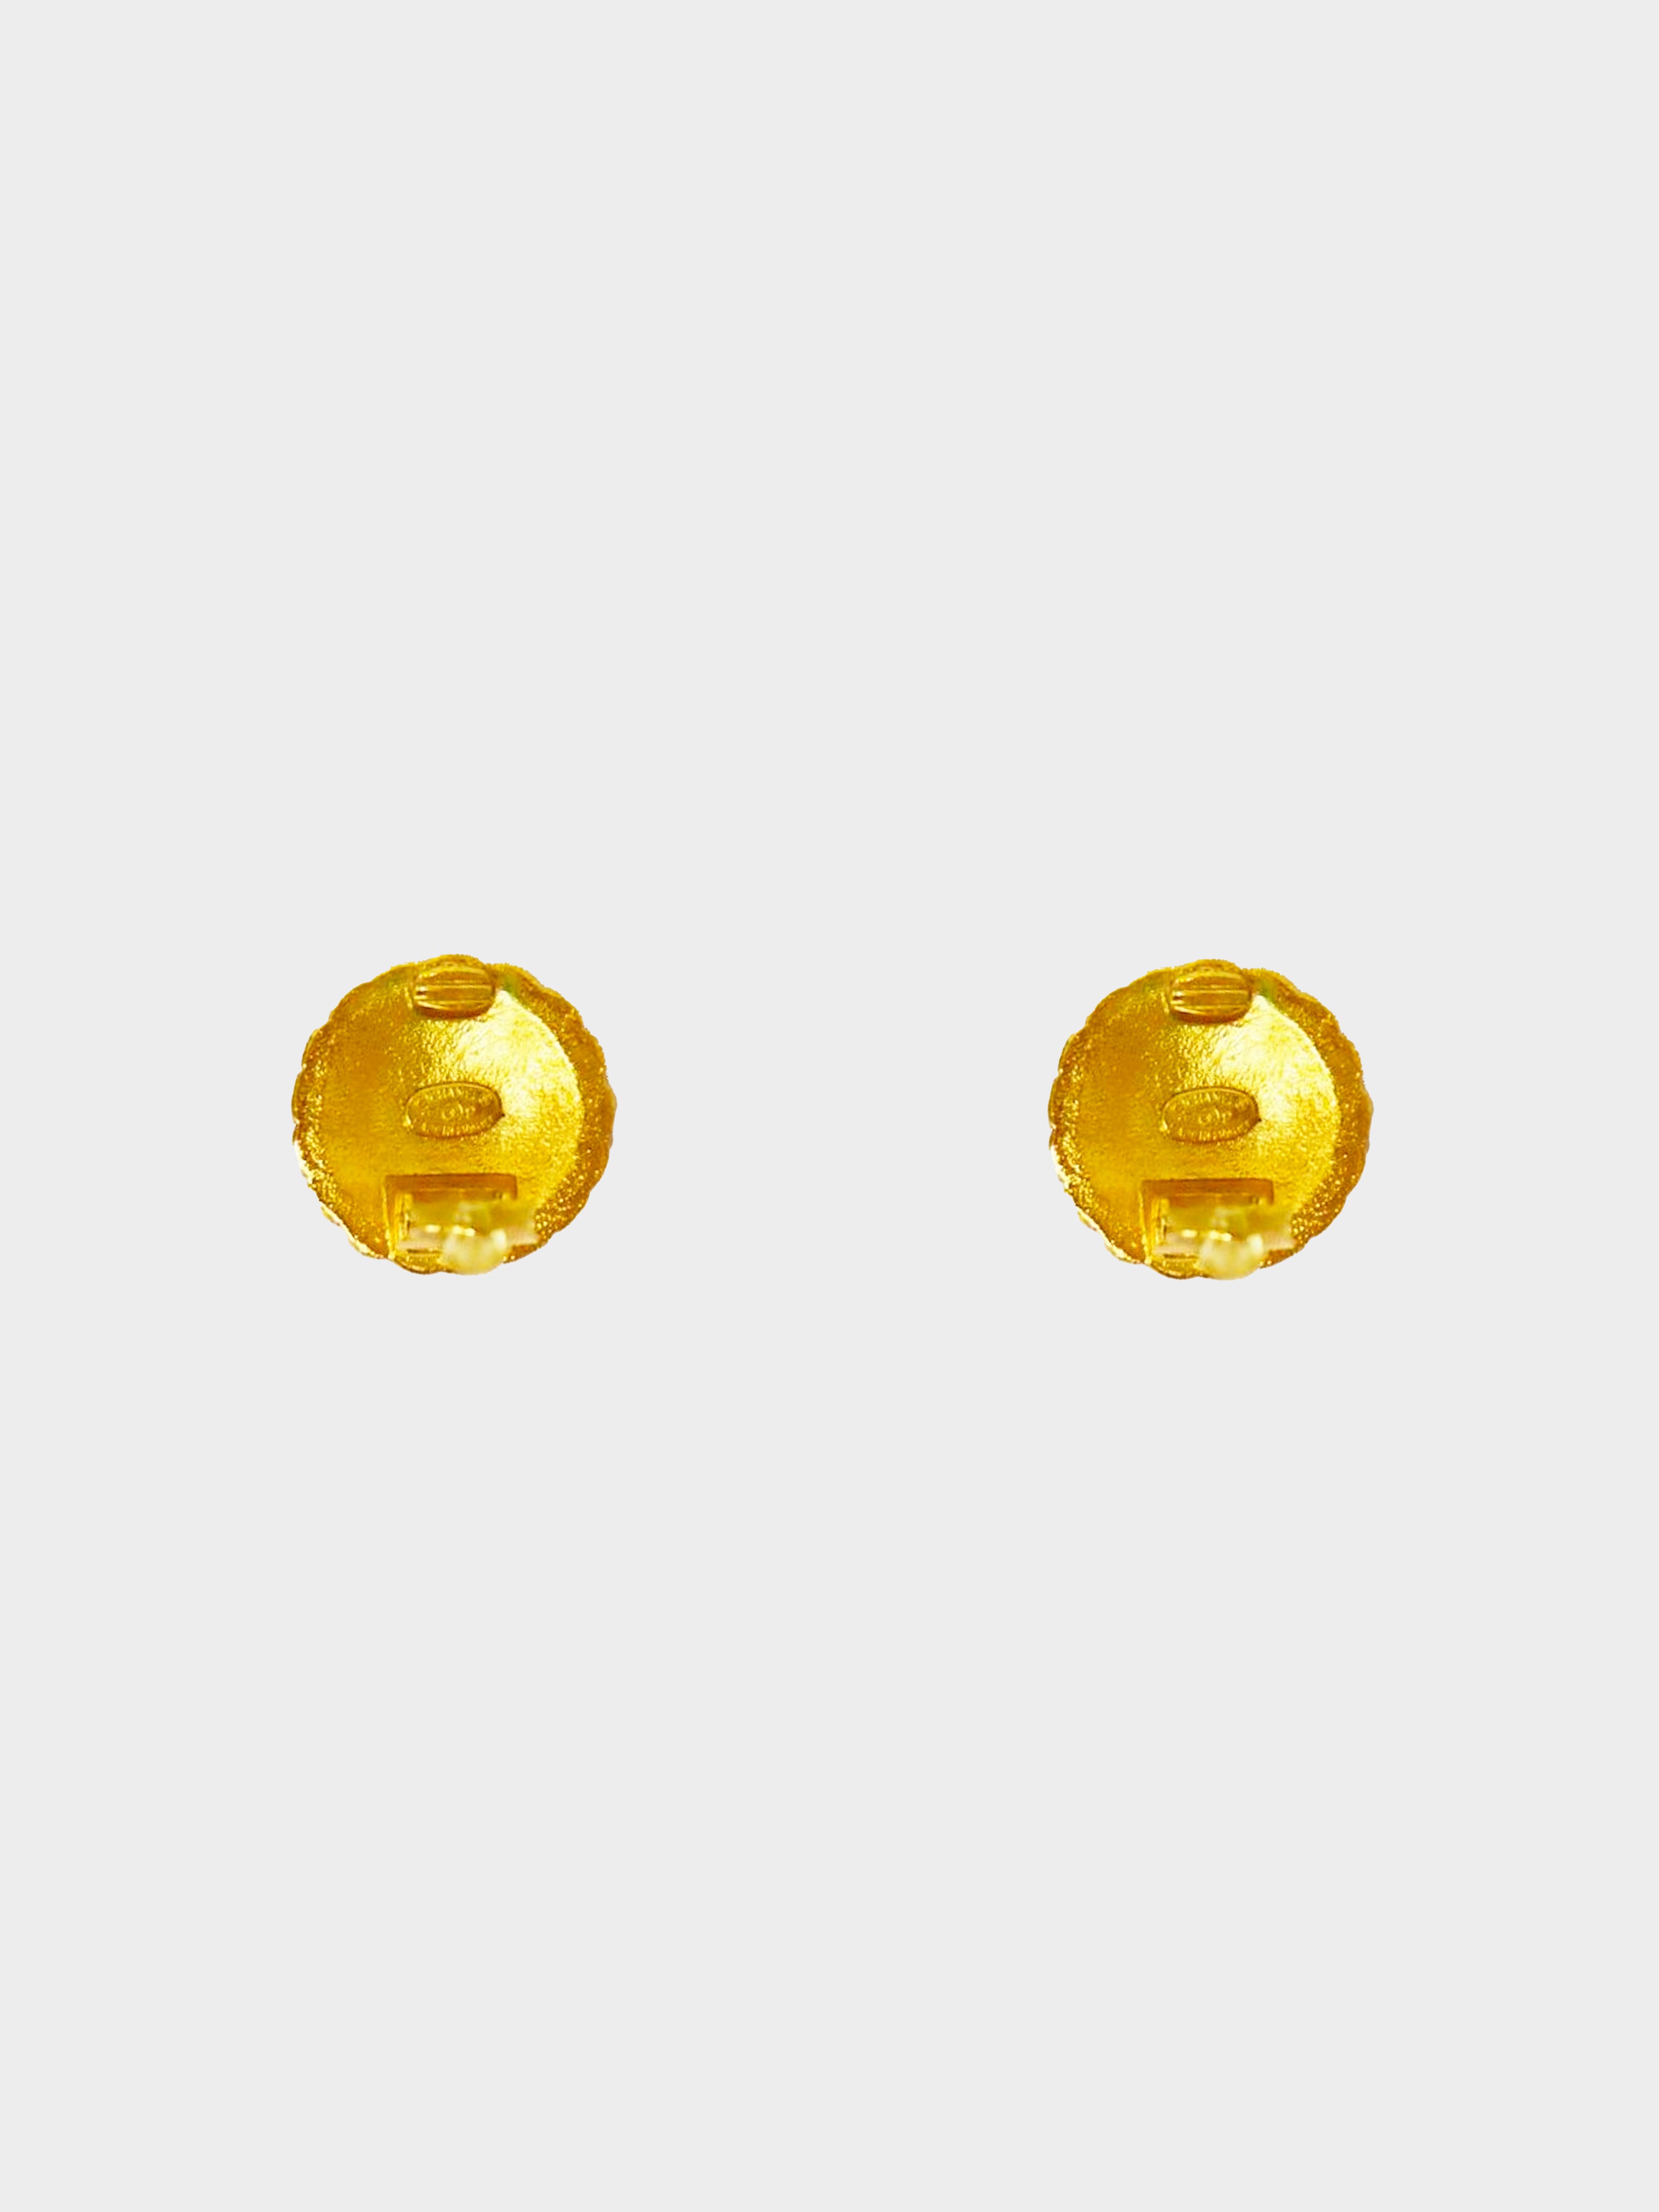 Chanel 1997 Gold Scalloped CC Earrings